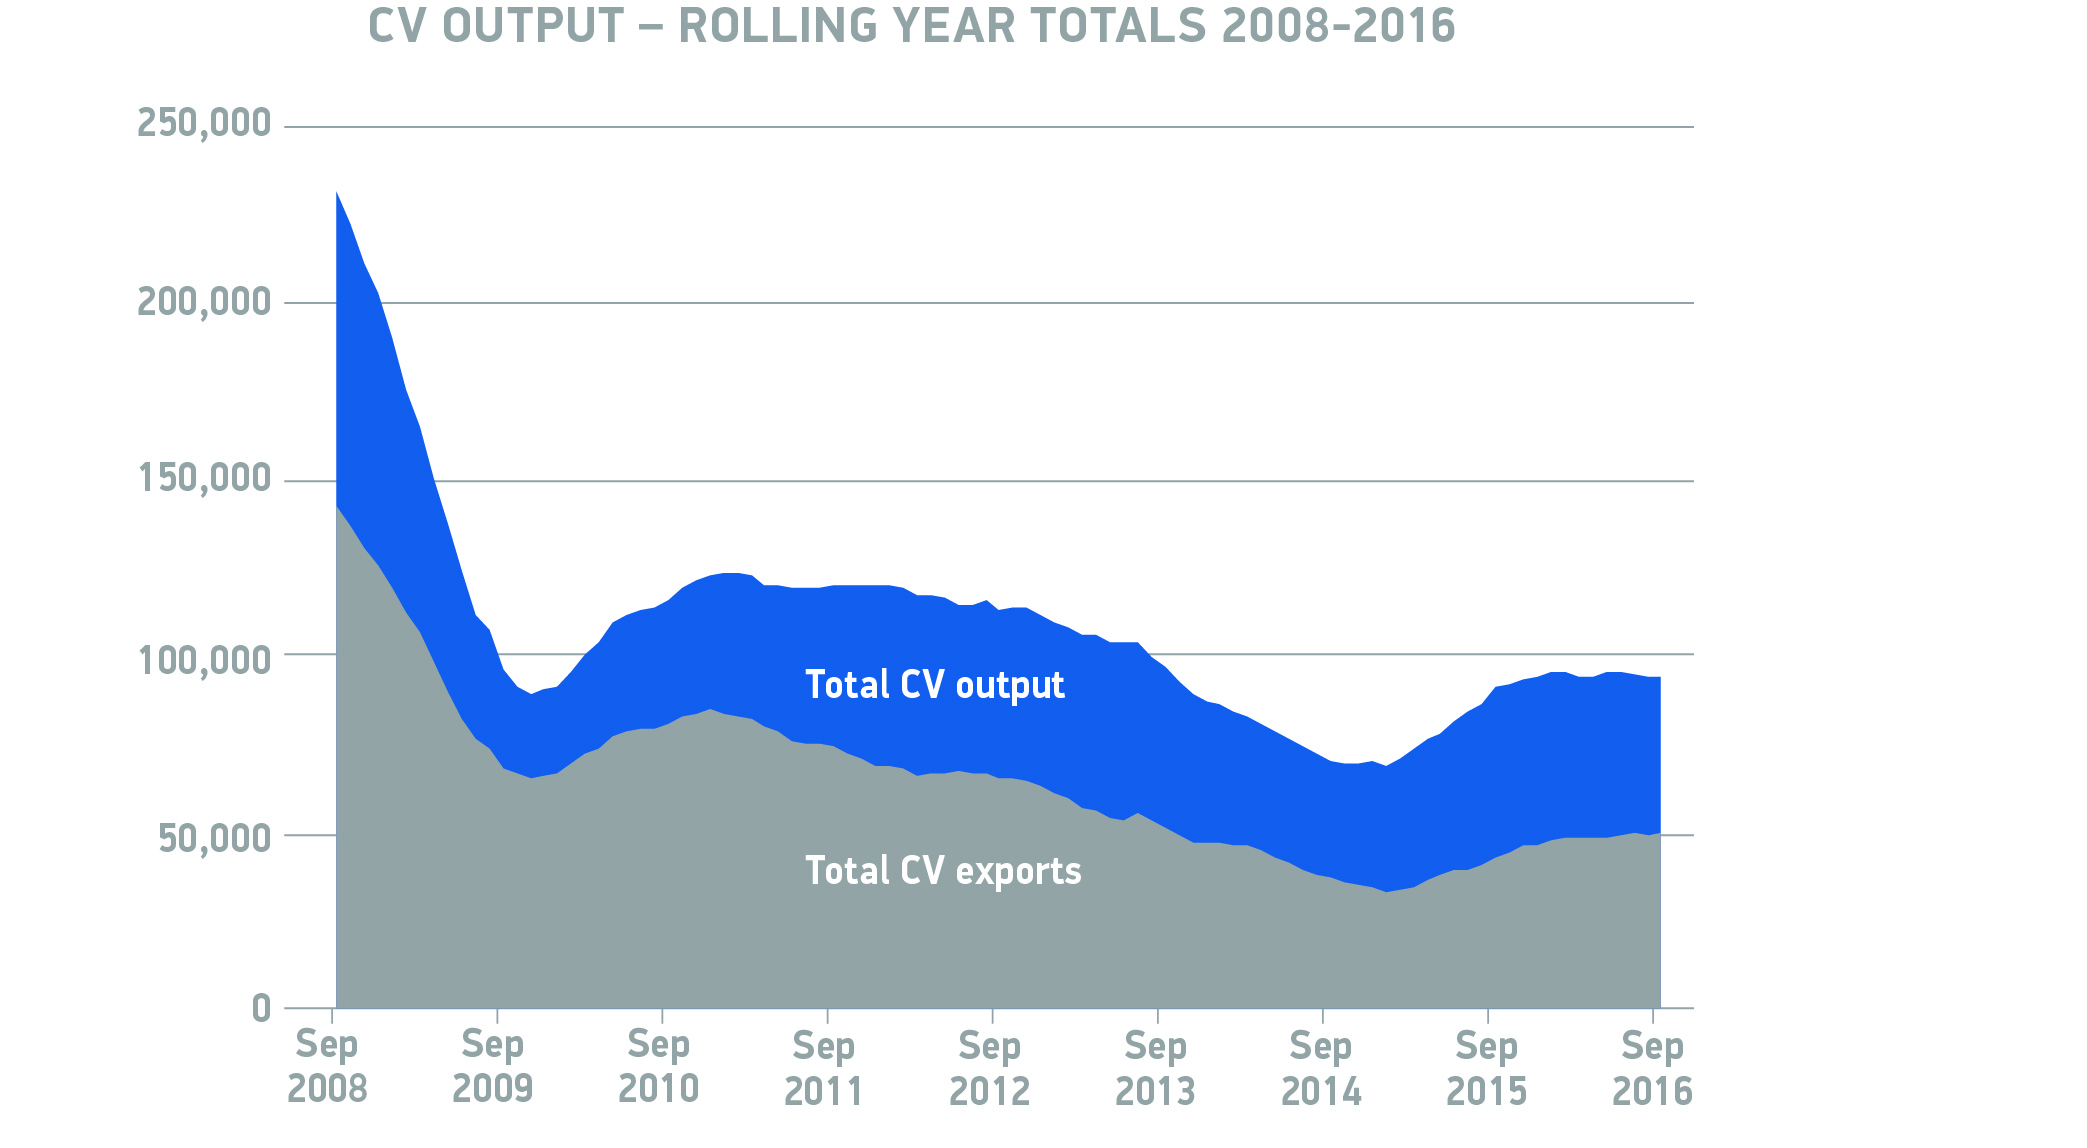 cv-output-rolling-year-totals-2009-2016-aug-2016